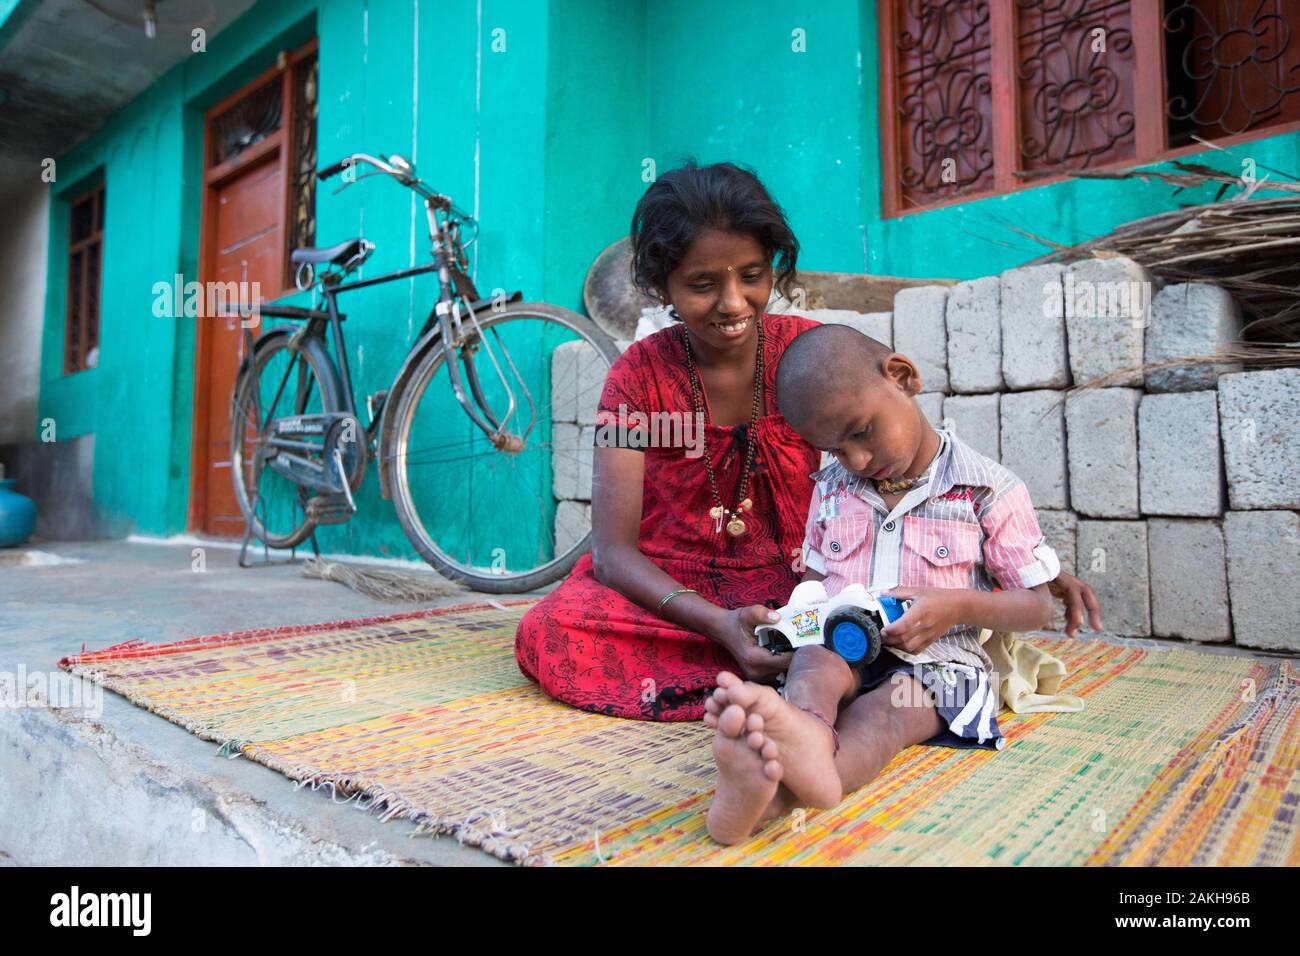 CAPTION: Mallesh has a severe learning disability. He needs almost constant care. During the earliest days following the birth of a child who has (or Stock Photo